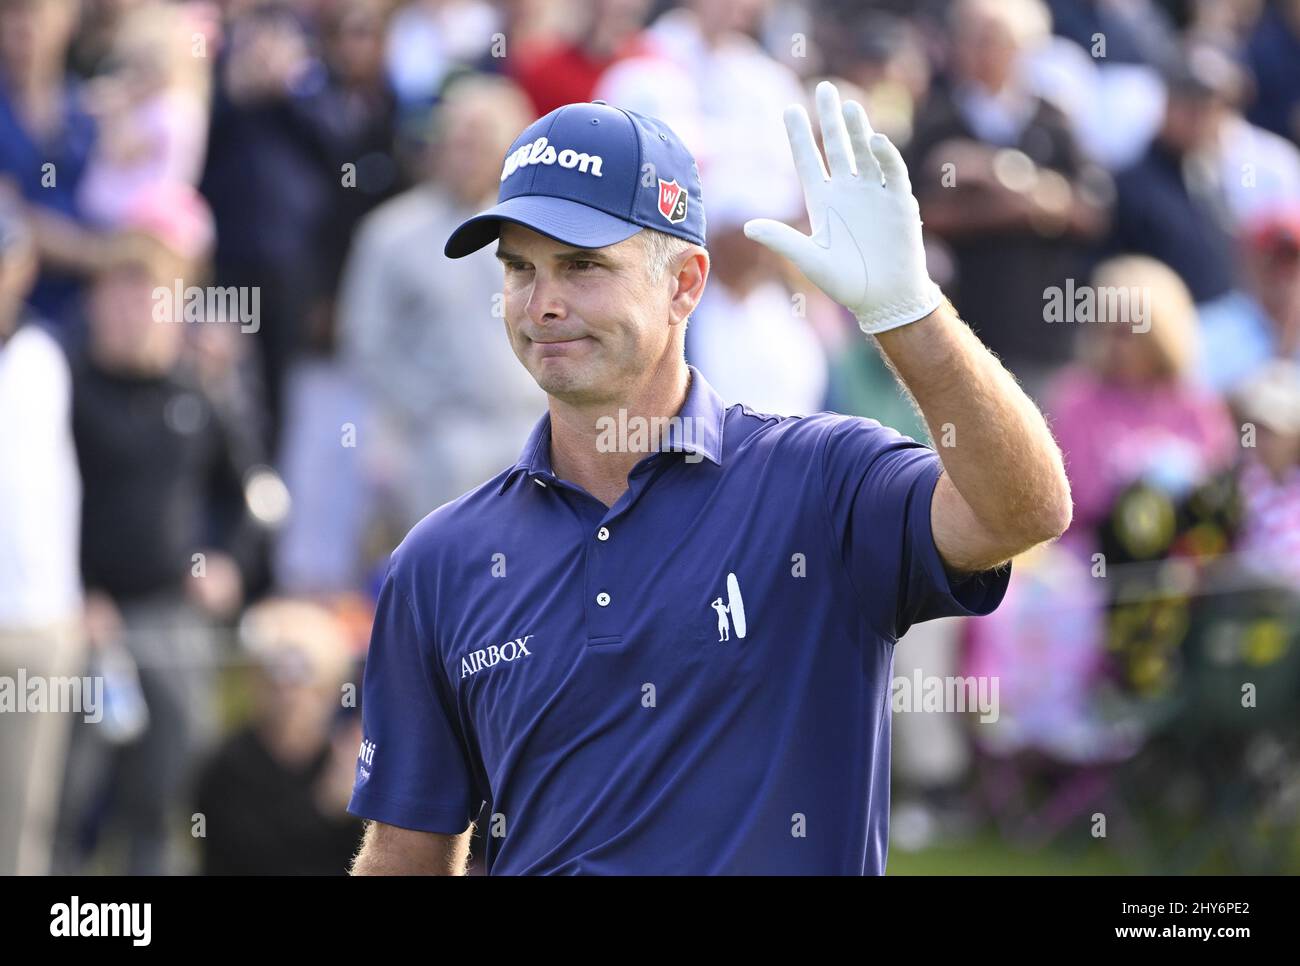 Ponte Vedra Beach, United States. 14th Mar, 2022. Kevin Streelman reacts after his tee shot on the 17th hole in the final round of the 2022 Players PGA Championship on the Stadium Course at TPC Sawgrass in Ponte Vedra Beach, Florida on Monday, March 14, 2022. Cameron Smith of Australia won the championship with a score of 13 under par. Photo by Joe Marino/UPI Credit: UPI/Alamy Live News Stock Photo